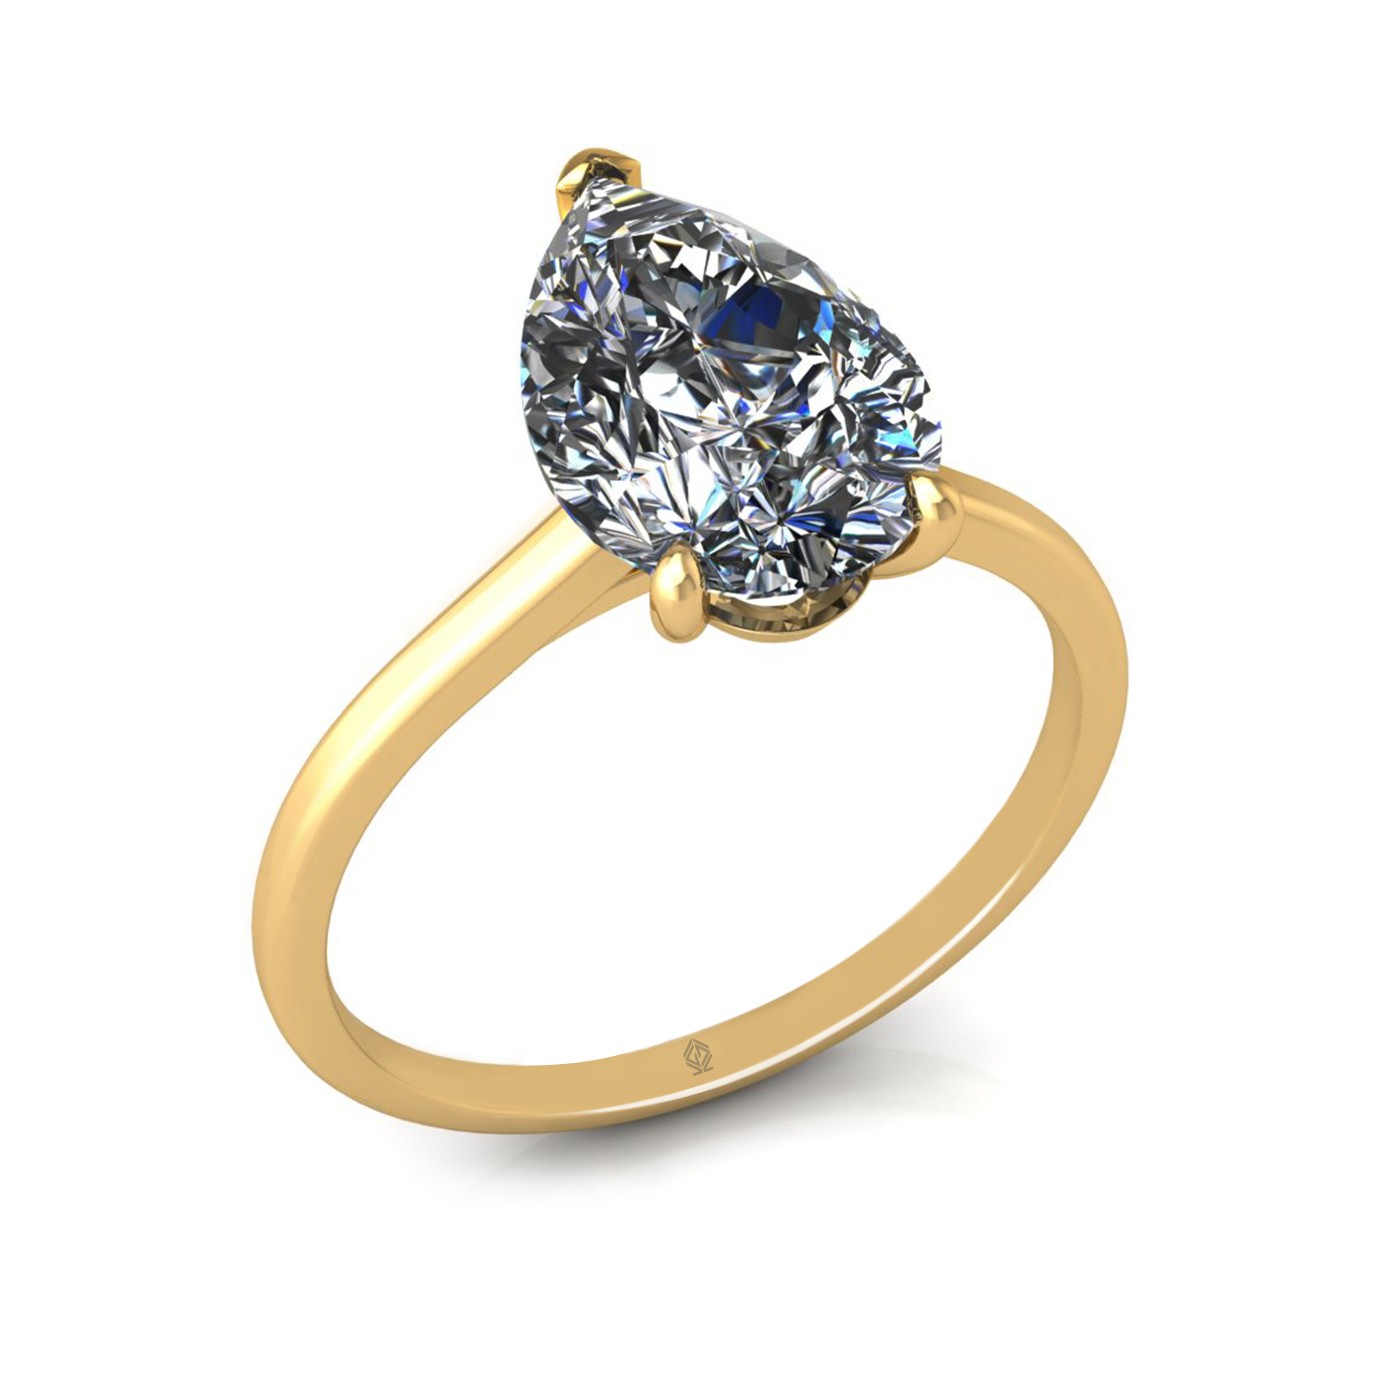 18k yellow gold  2,50 ct 3 prongs solitaire pear cut diamond engagement ring with whisper thin band